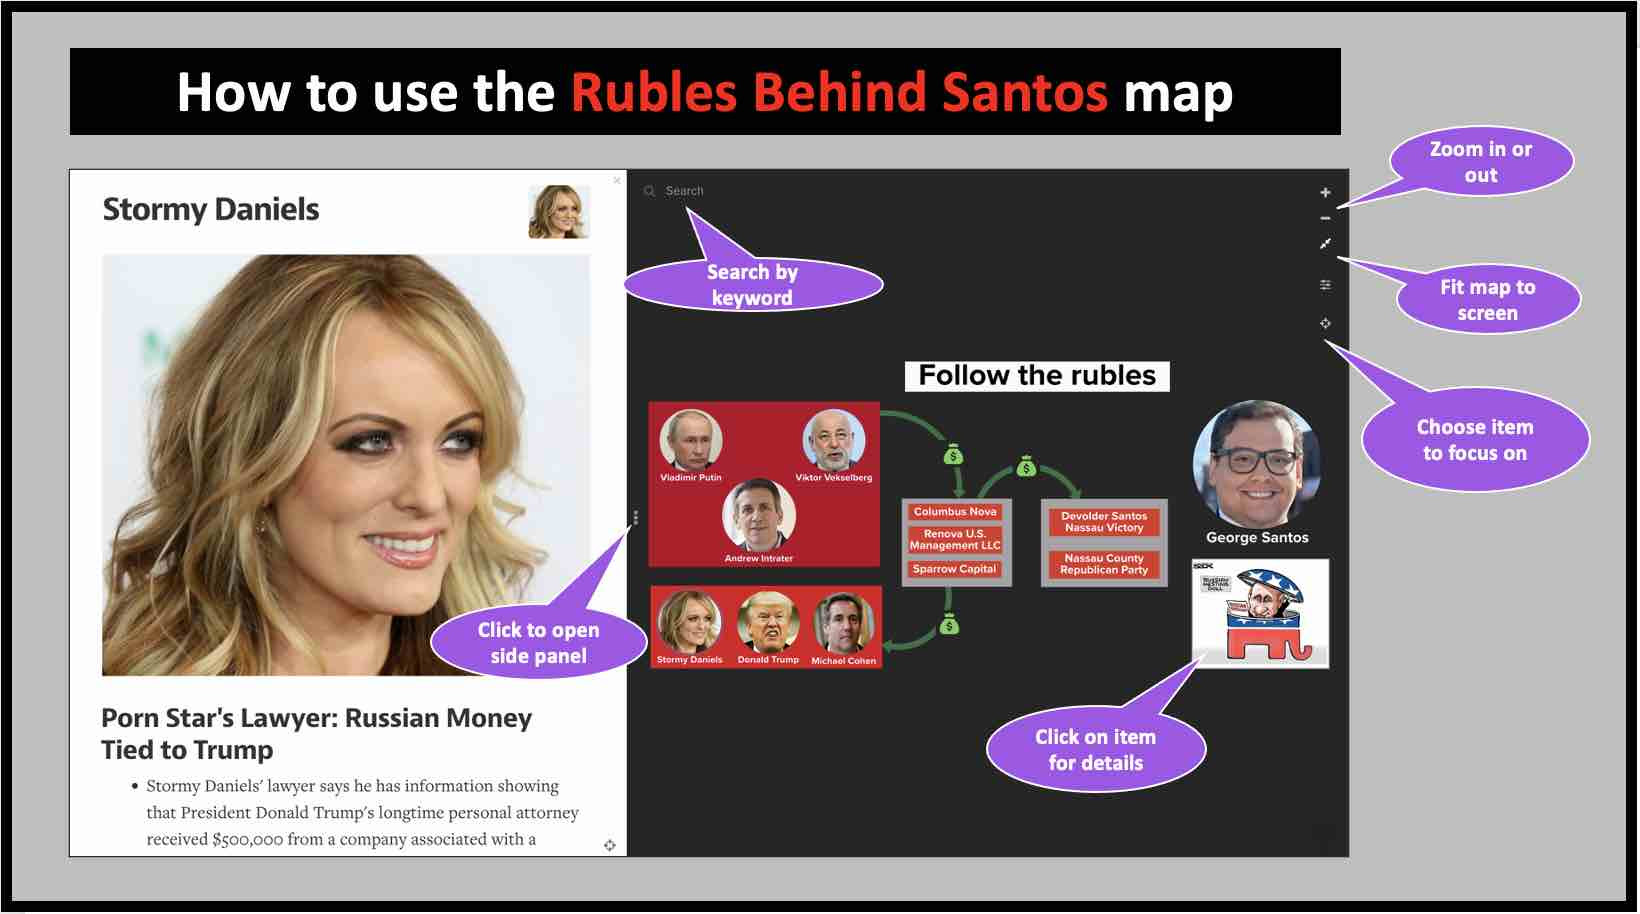 How to use the Rubles behind Santo map